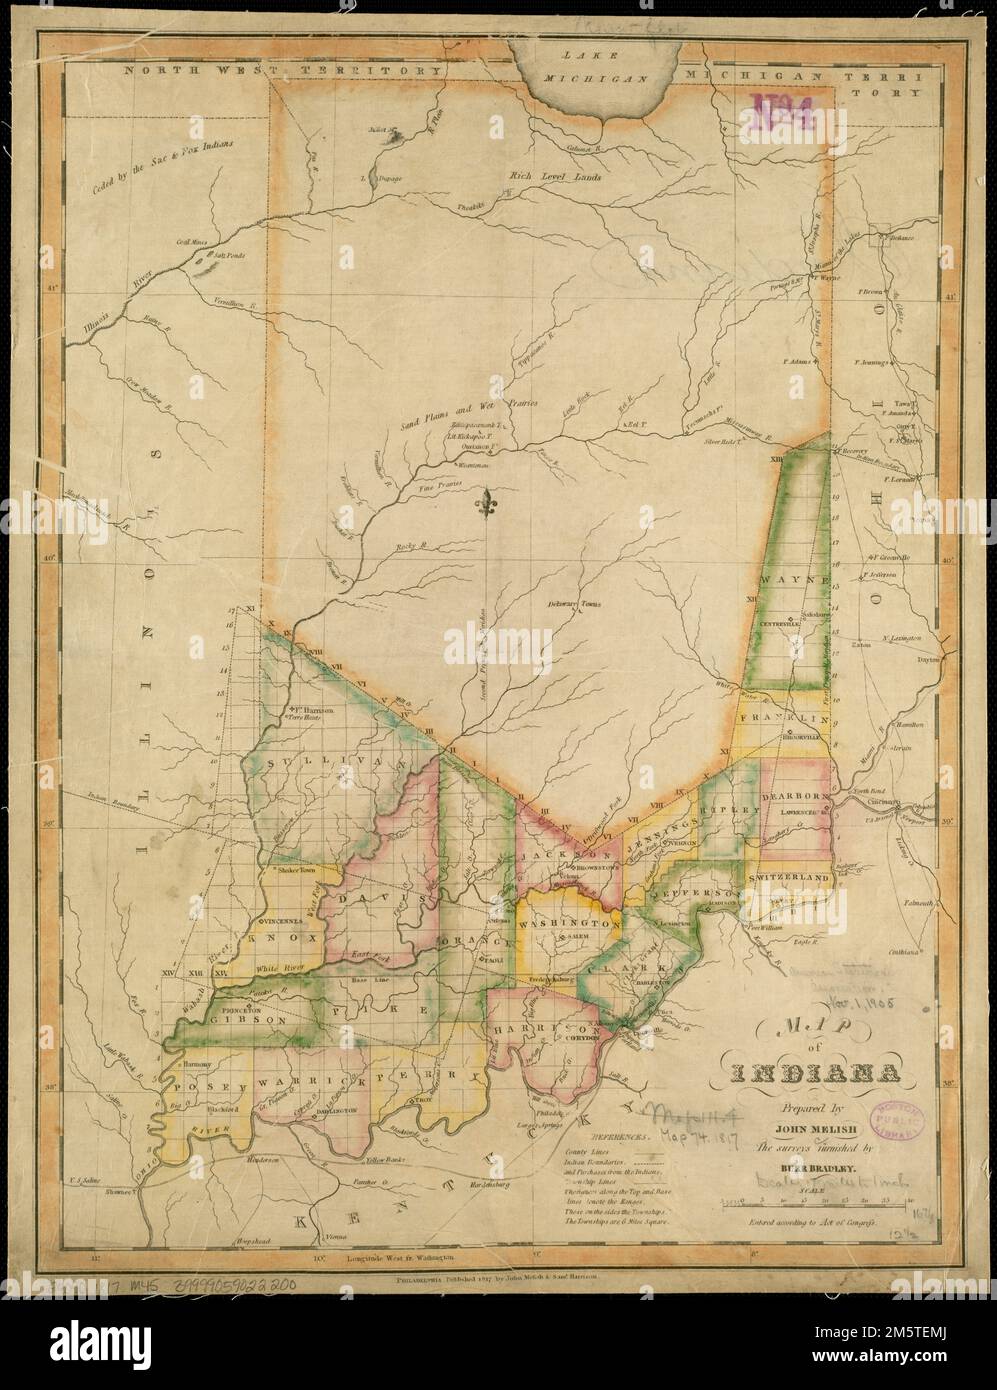 Map of Indiana. Relief shown pictorially. Identifies counties in southern Indiana.. America Transformed: Indiana Territory ('Land of Indians') was similarly carved out of the Northwest Territory in 1800. Published in 1817, a year after Indiana’s statehood, this map indicates that officials had divided the southern third of the state into counties and townships. Numerous tribal nations, including the Myaamiaki (Miami), Kiikaapoi (Kickapoo), Lenape (Delaware), Shawnee, and Neshnabé (Potawatomi) inhabited the region. The map identifies land cessions before 1817 with dashed lines. From the 1820s t Stock Photo